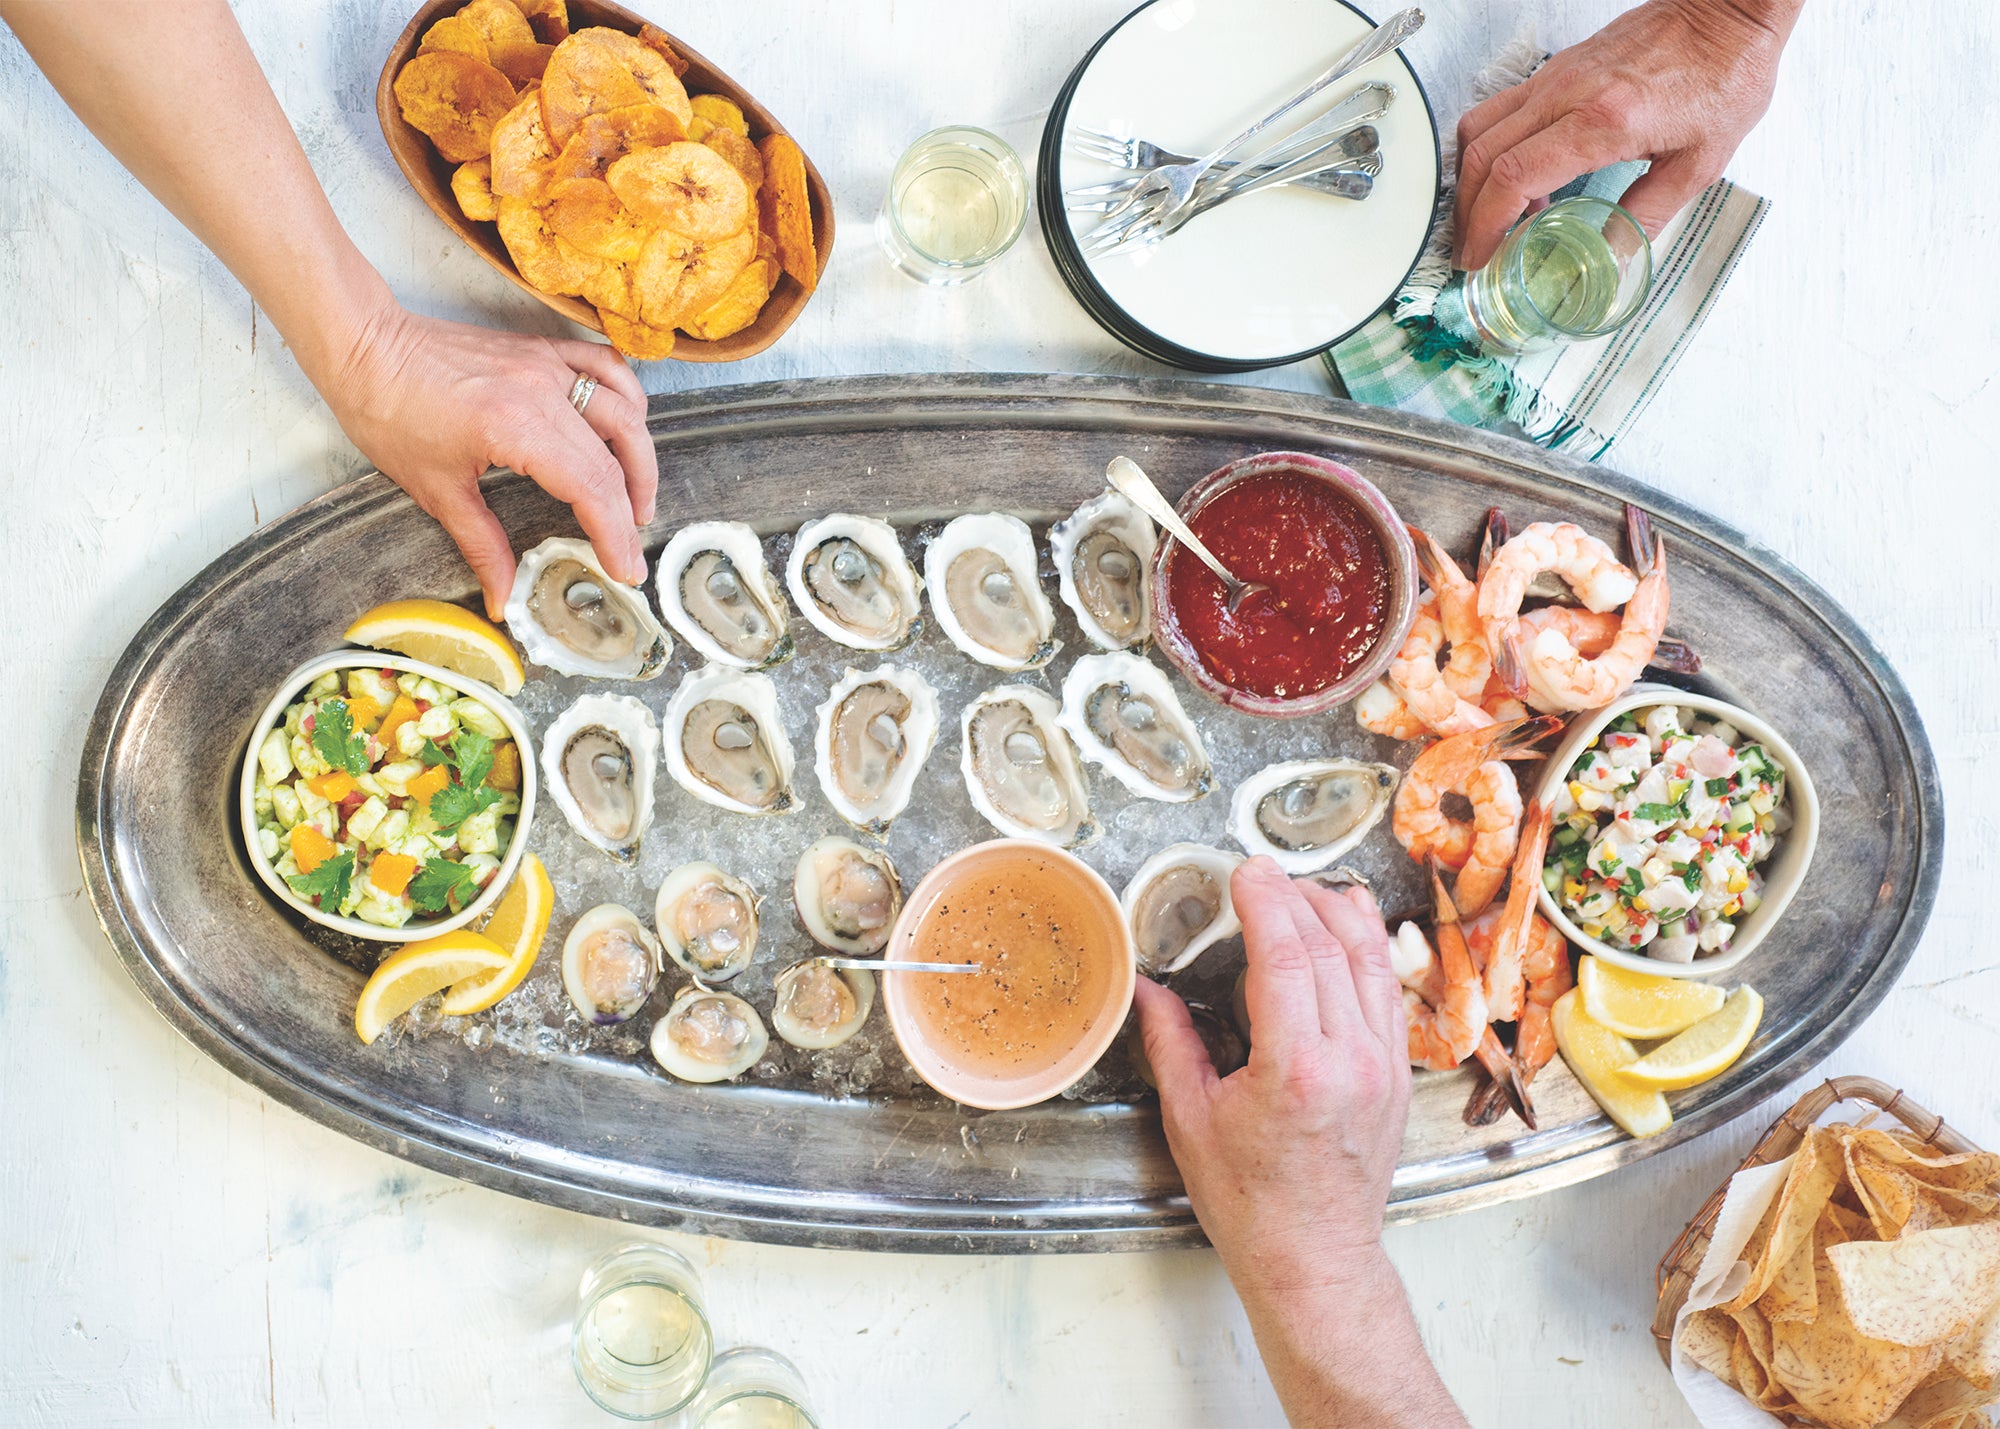 How to Build a Raw Bar Platter, from 'The Row 34 Cookbook'